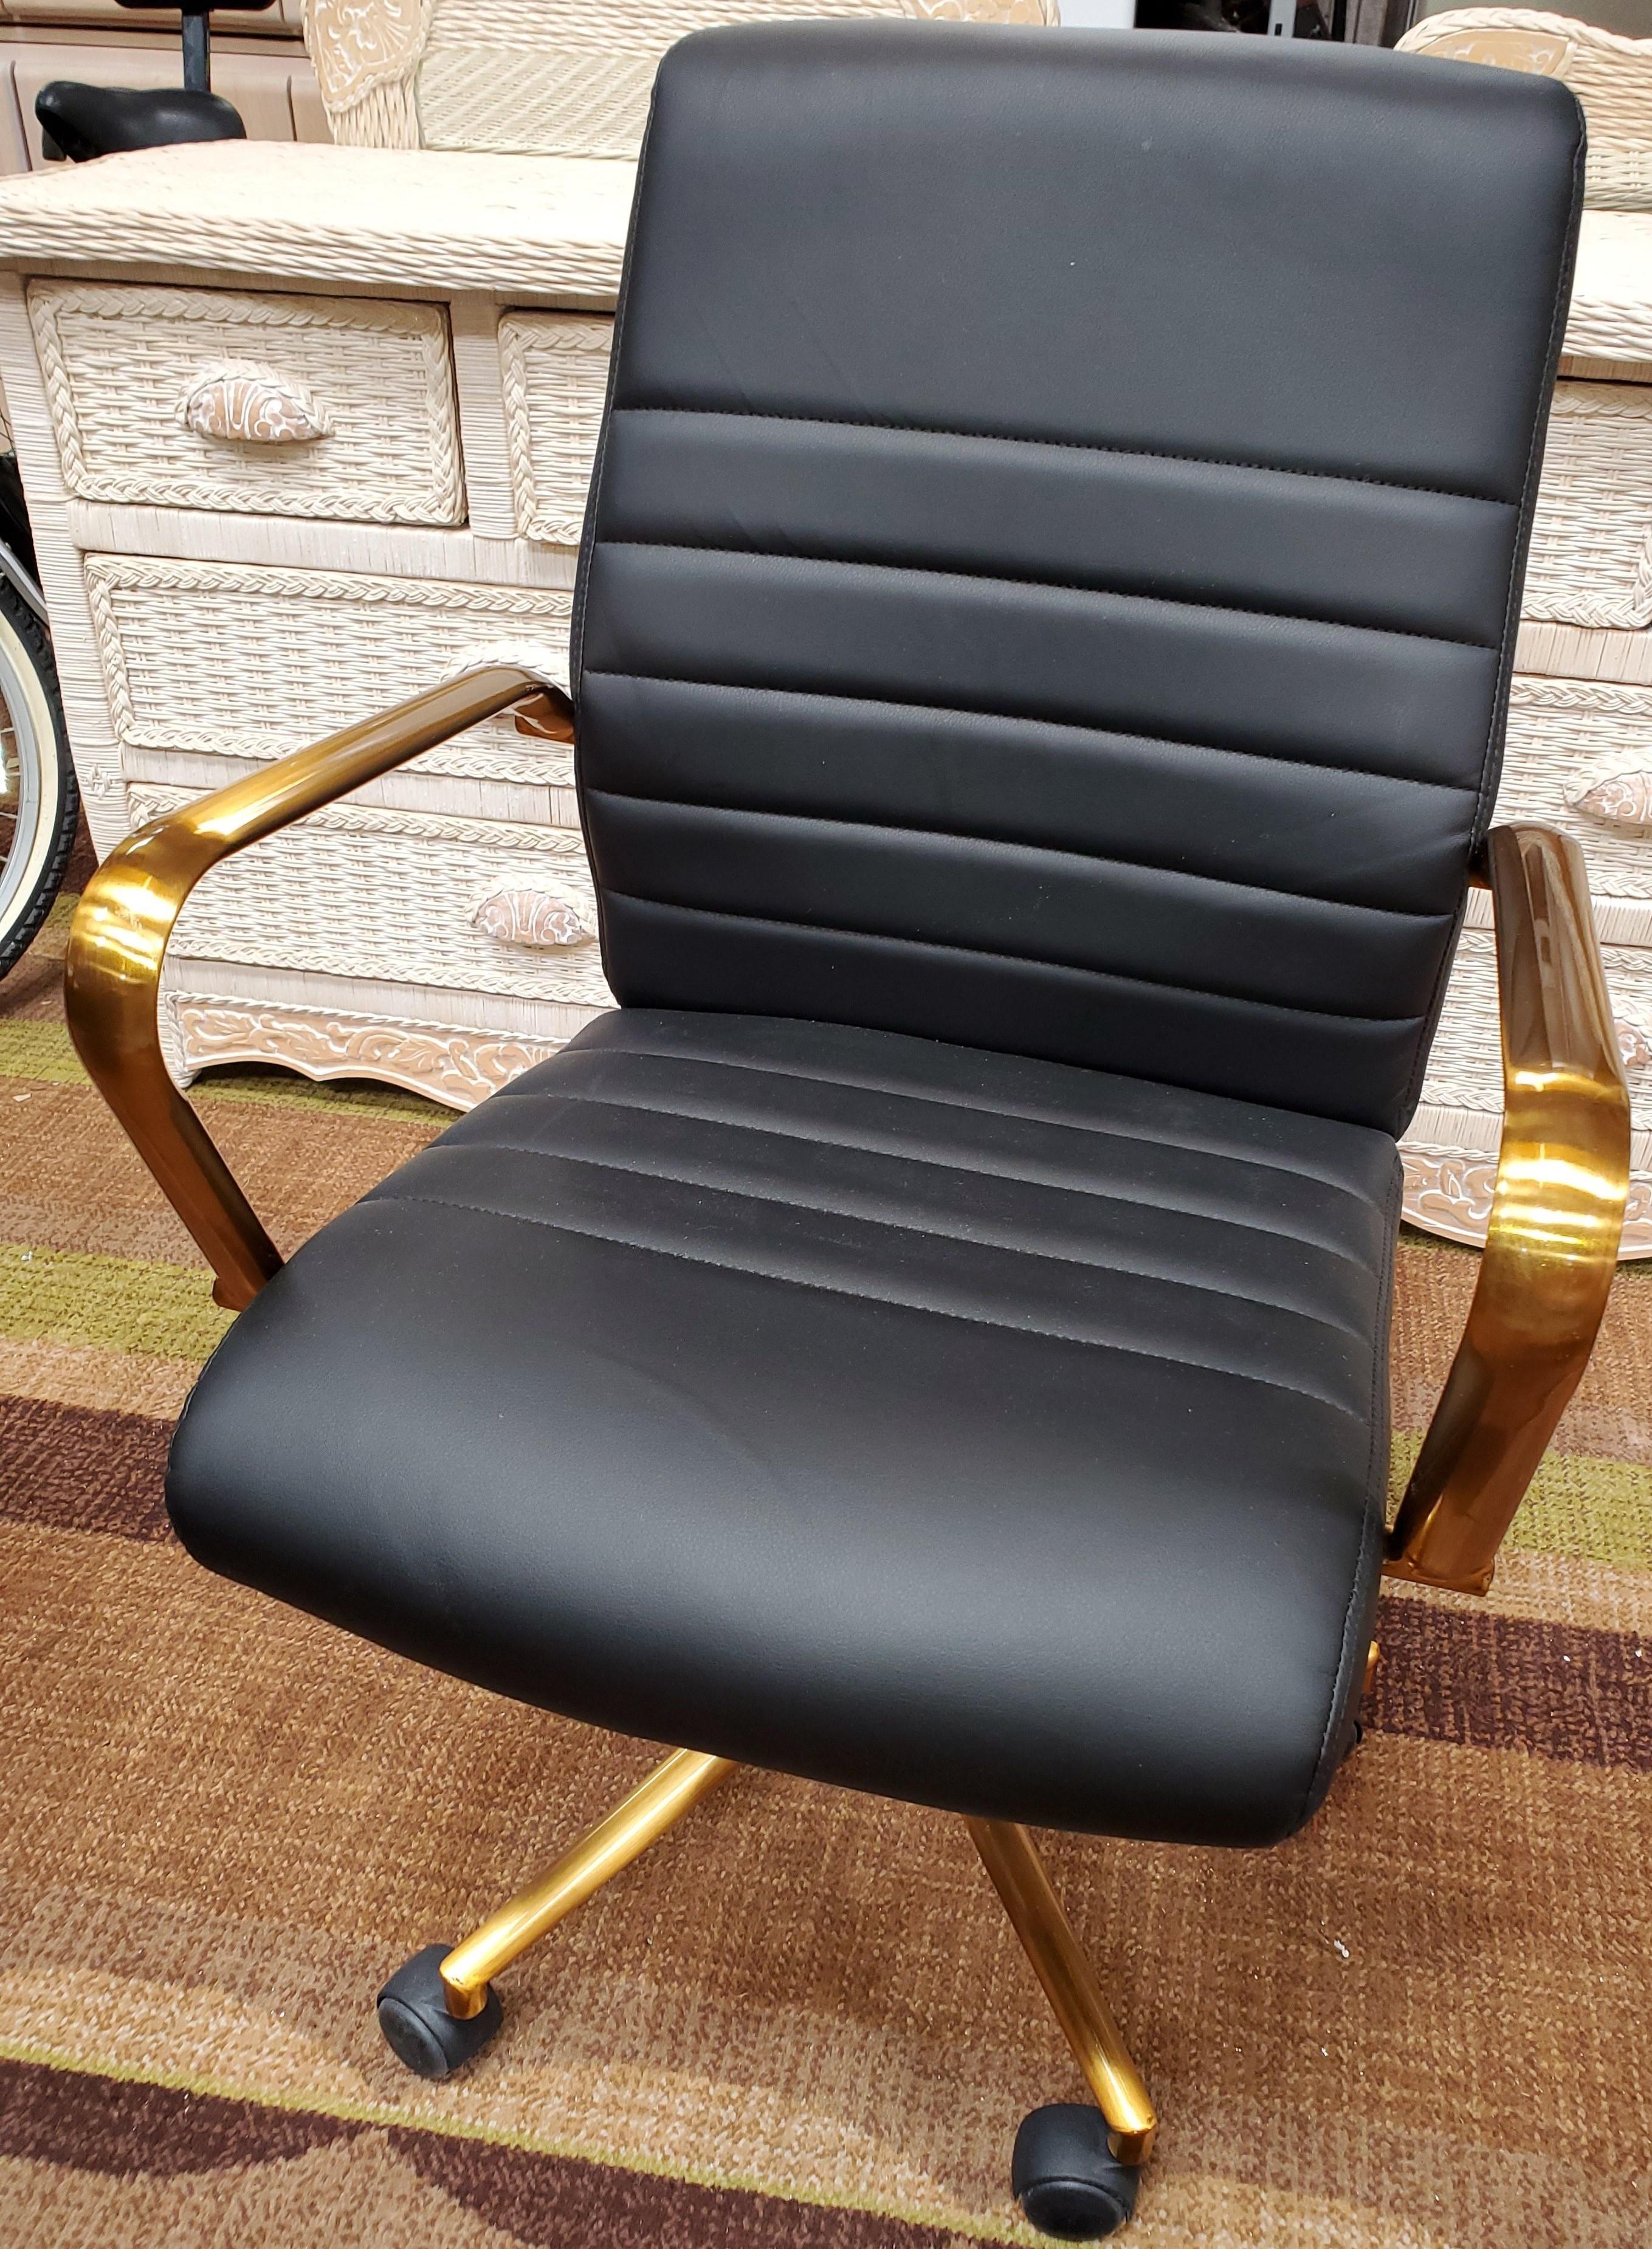 NEW DESIGNER FROM WMC - OFFICE CHAIR WITH GOLD COLOR METAL ARMS